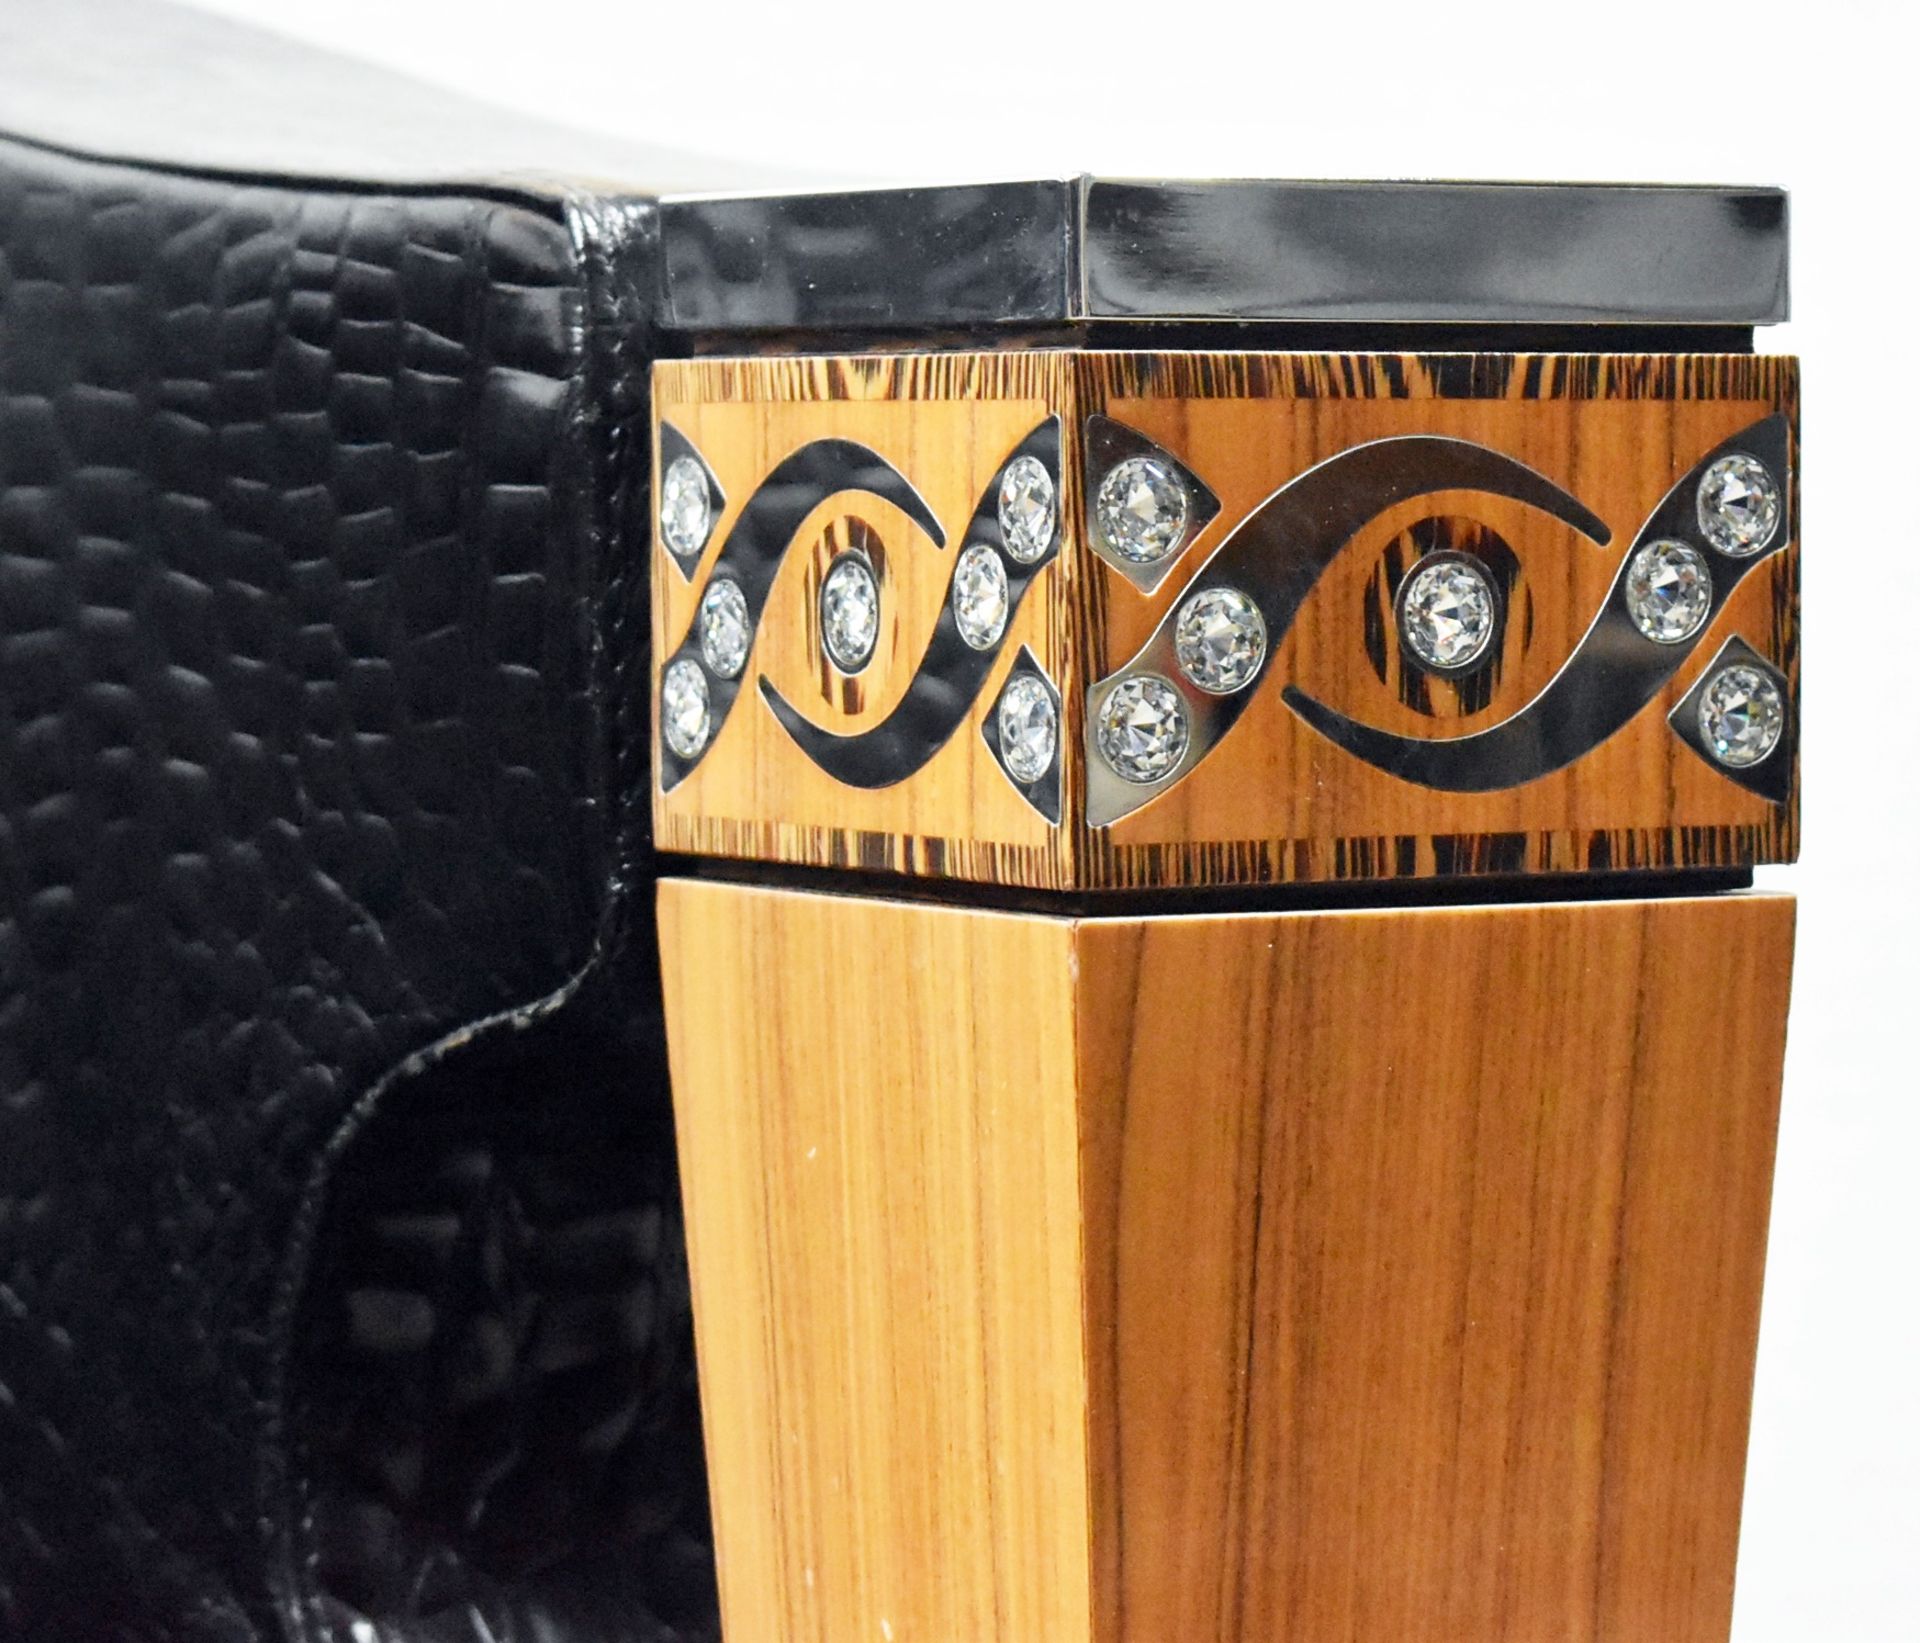 1 x Bespoke Art Deco Black 'Crocodile Skin' Armchair Wooden Arms Embellished With Crystal & Silver - Image 8 of 13